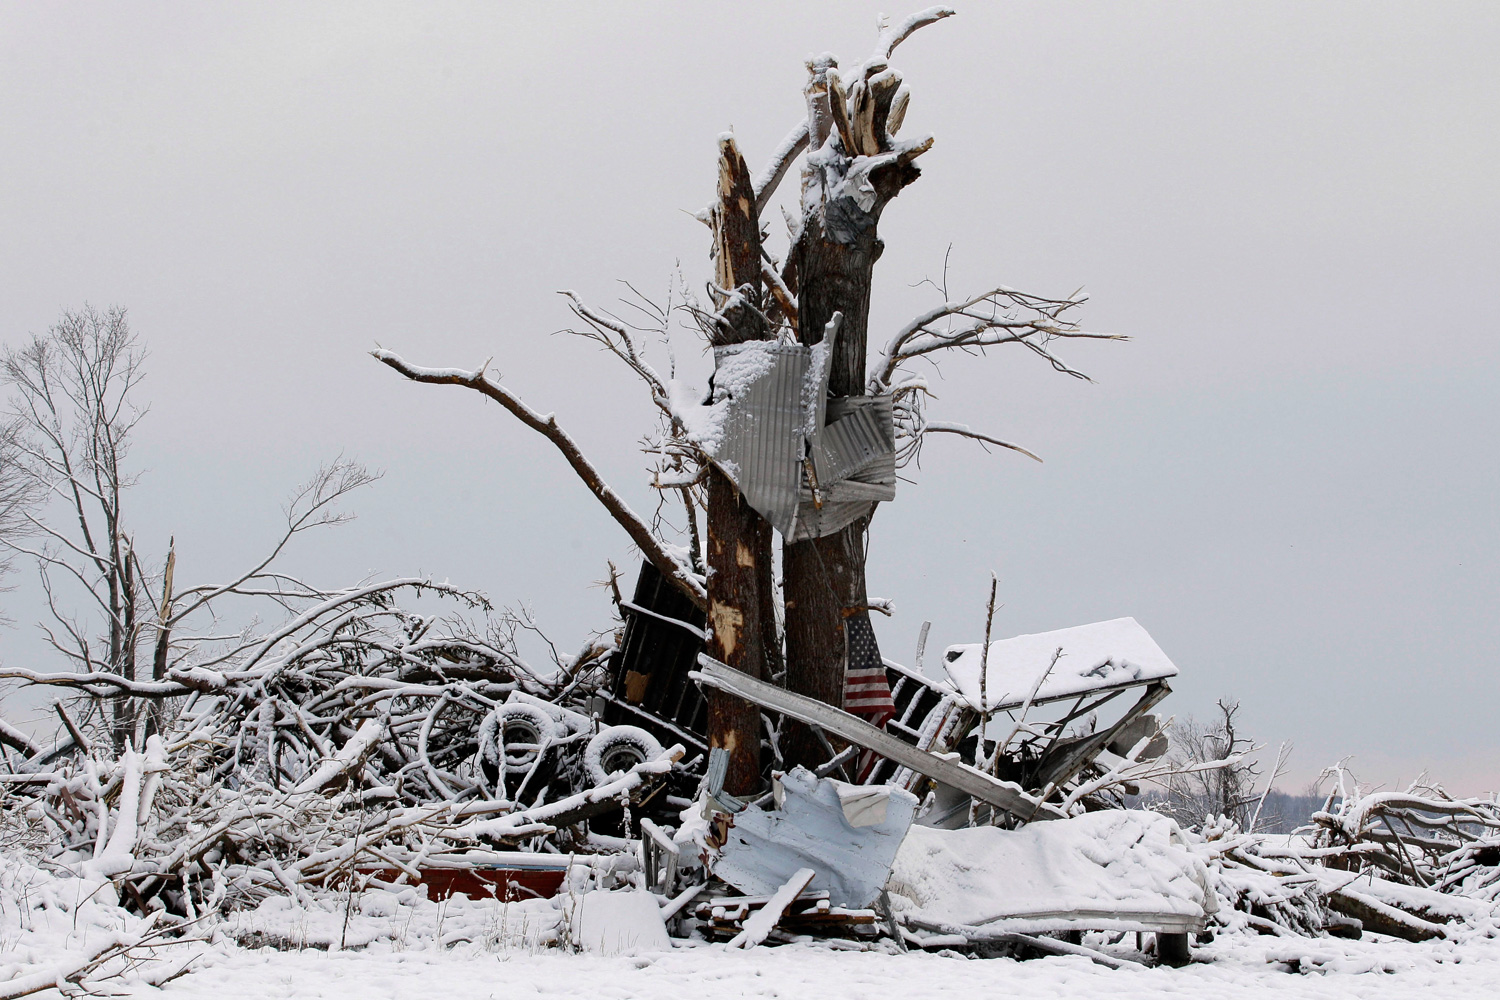 March 5, 2012. Snow covers a demolished house in Marysville, Ind. after a tornado ripped through the town.